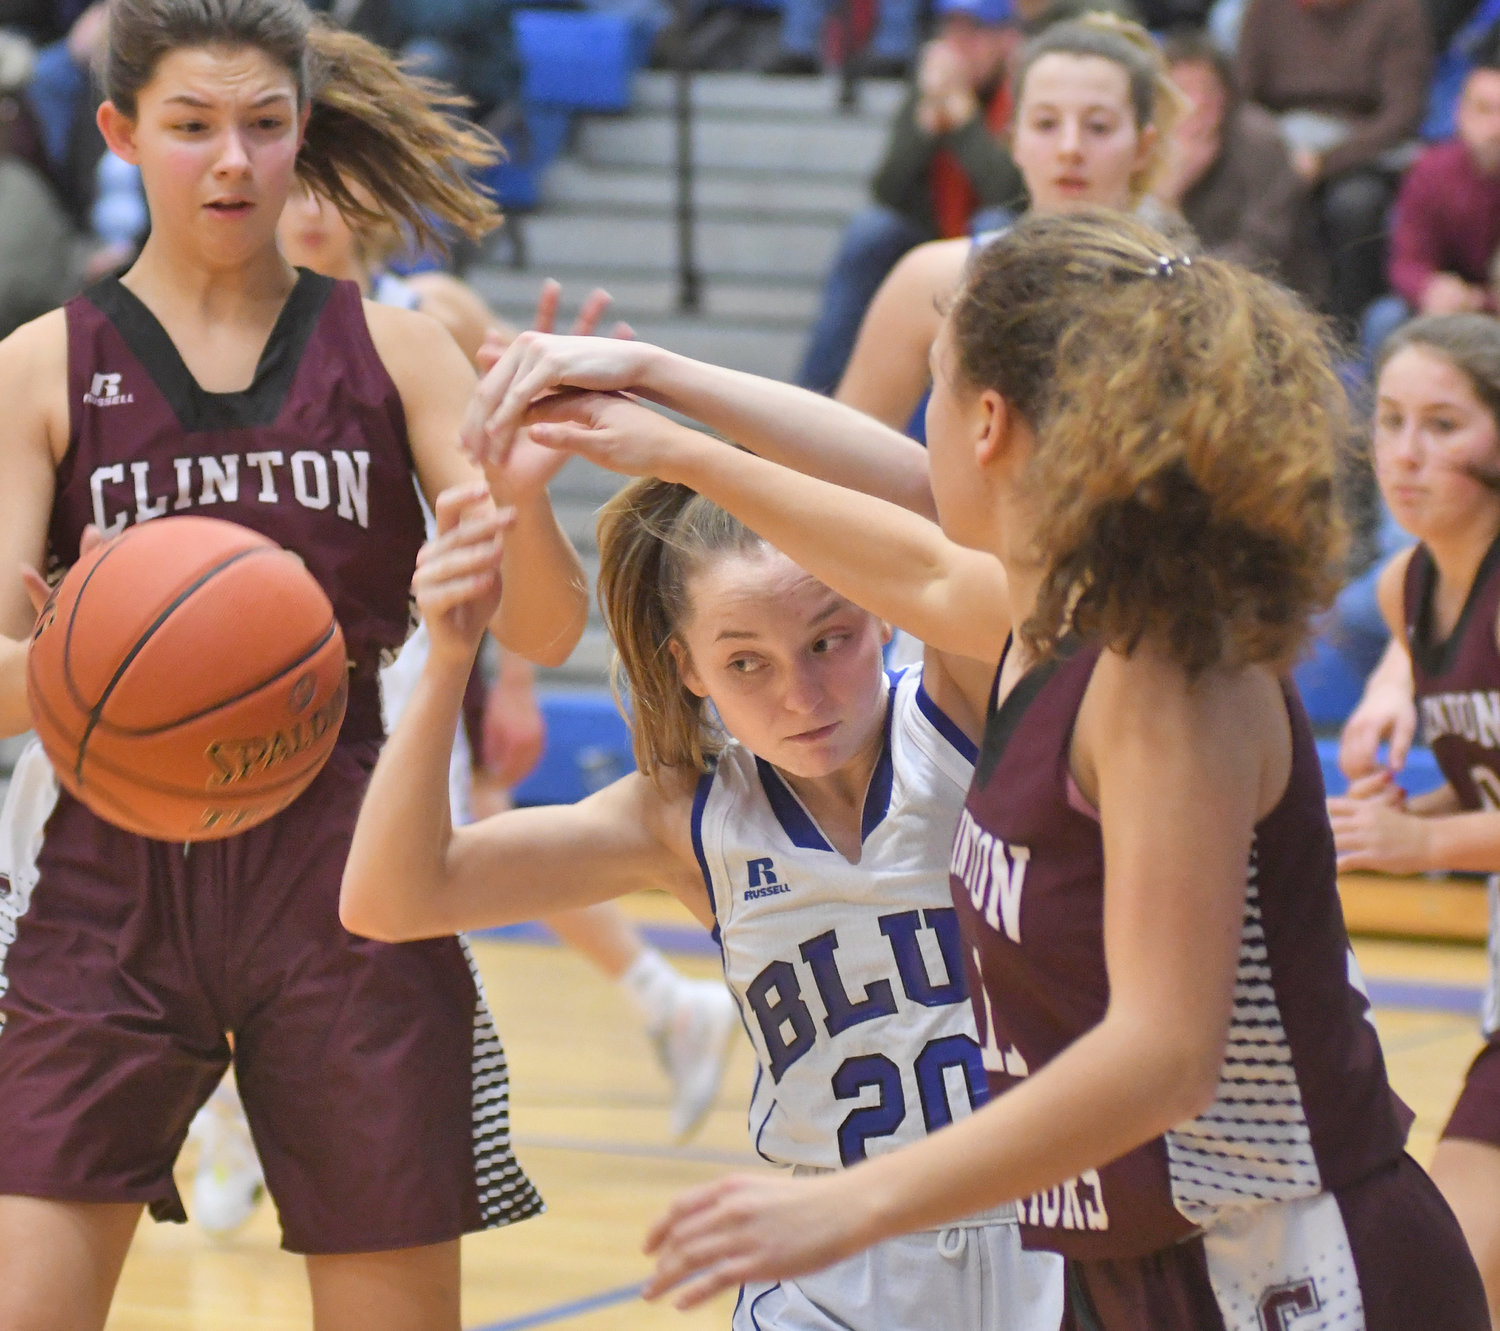 Trunfio Leads Clinton Girls Squad To Basketball Win Over Camden Rome Daily Sentinel